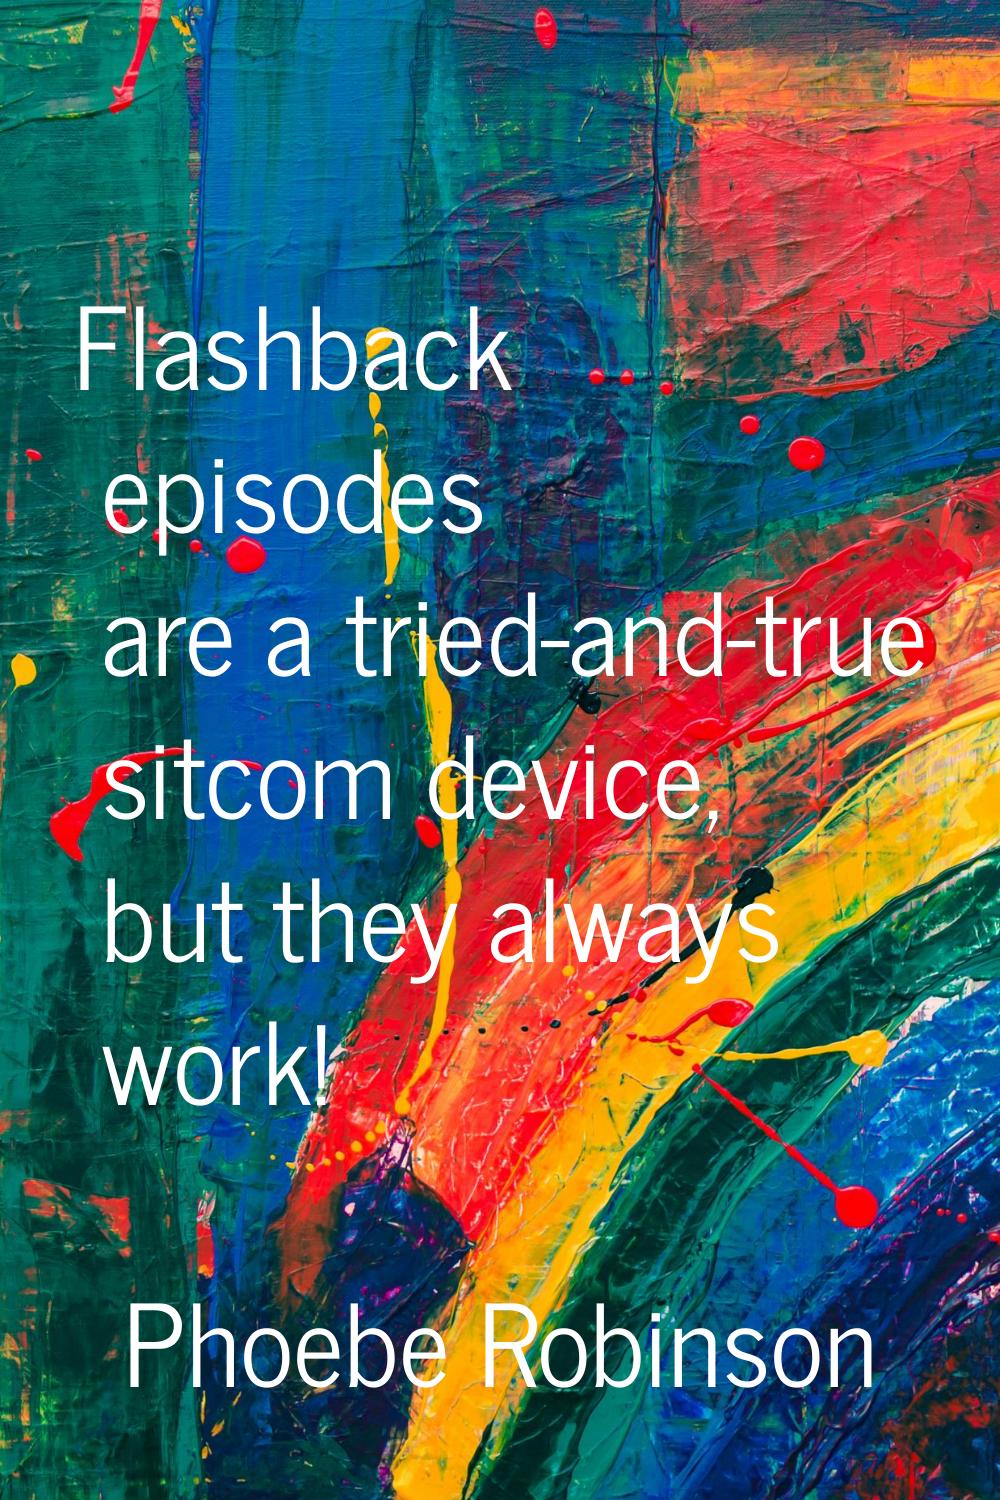 Flashback episodes are a tried-and-true sitcom device, but they always work!